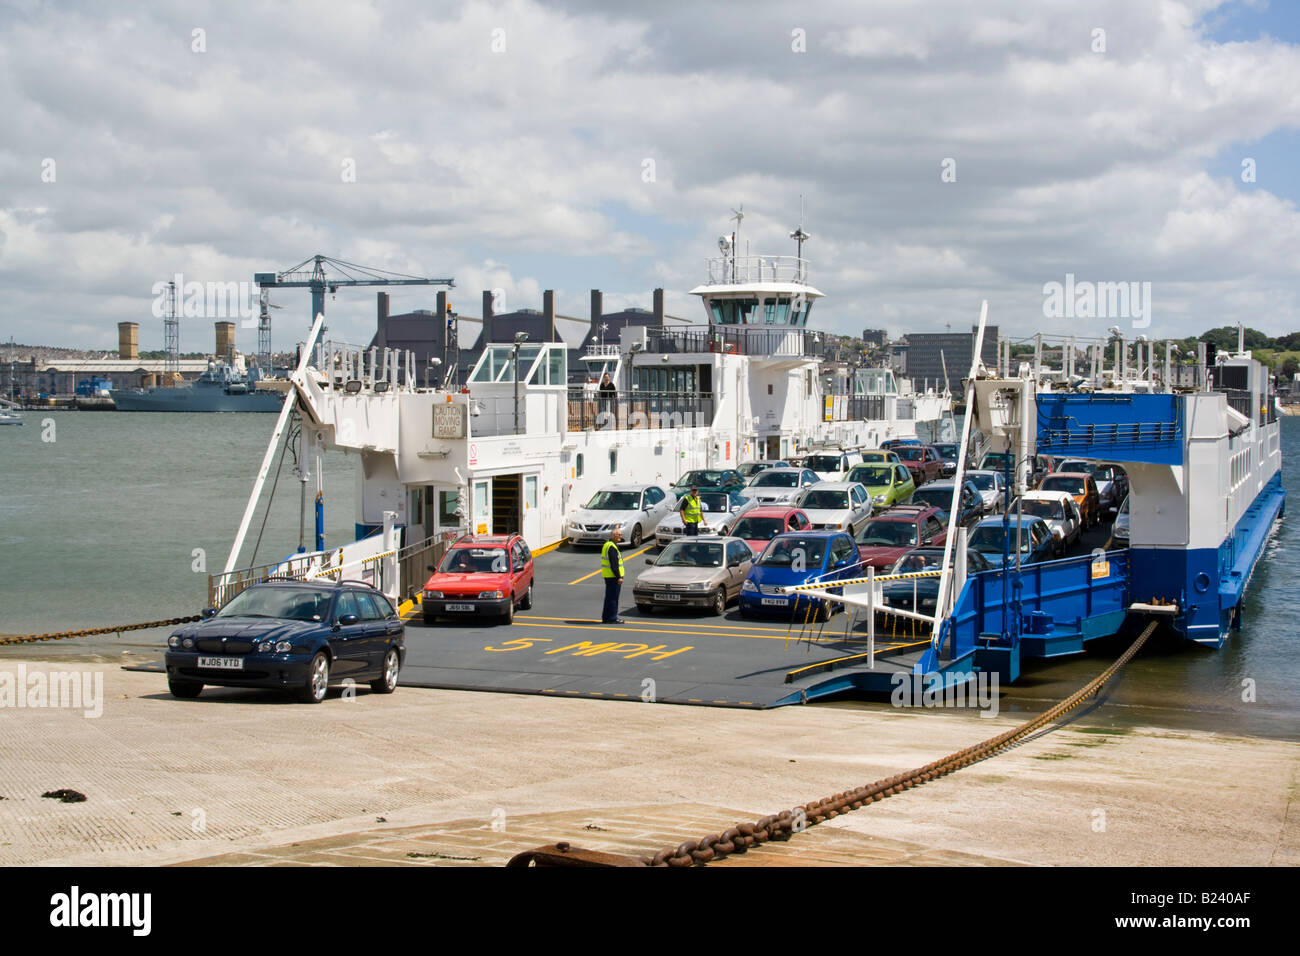 Cars disembarking a ferry at Torpoint Cornwall England UK Stock Photo